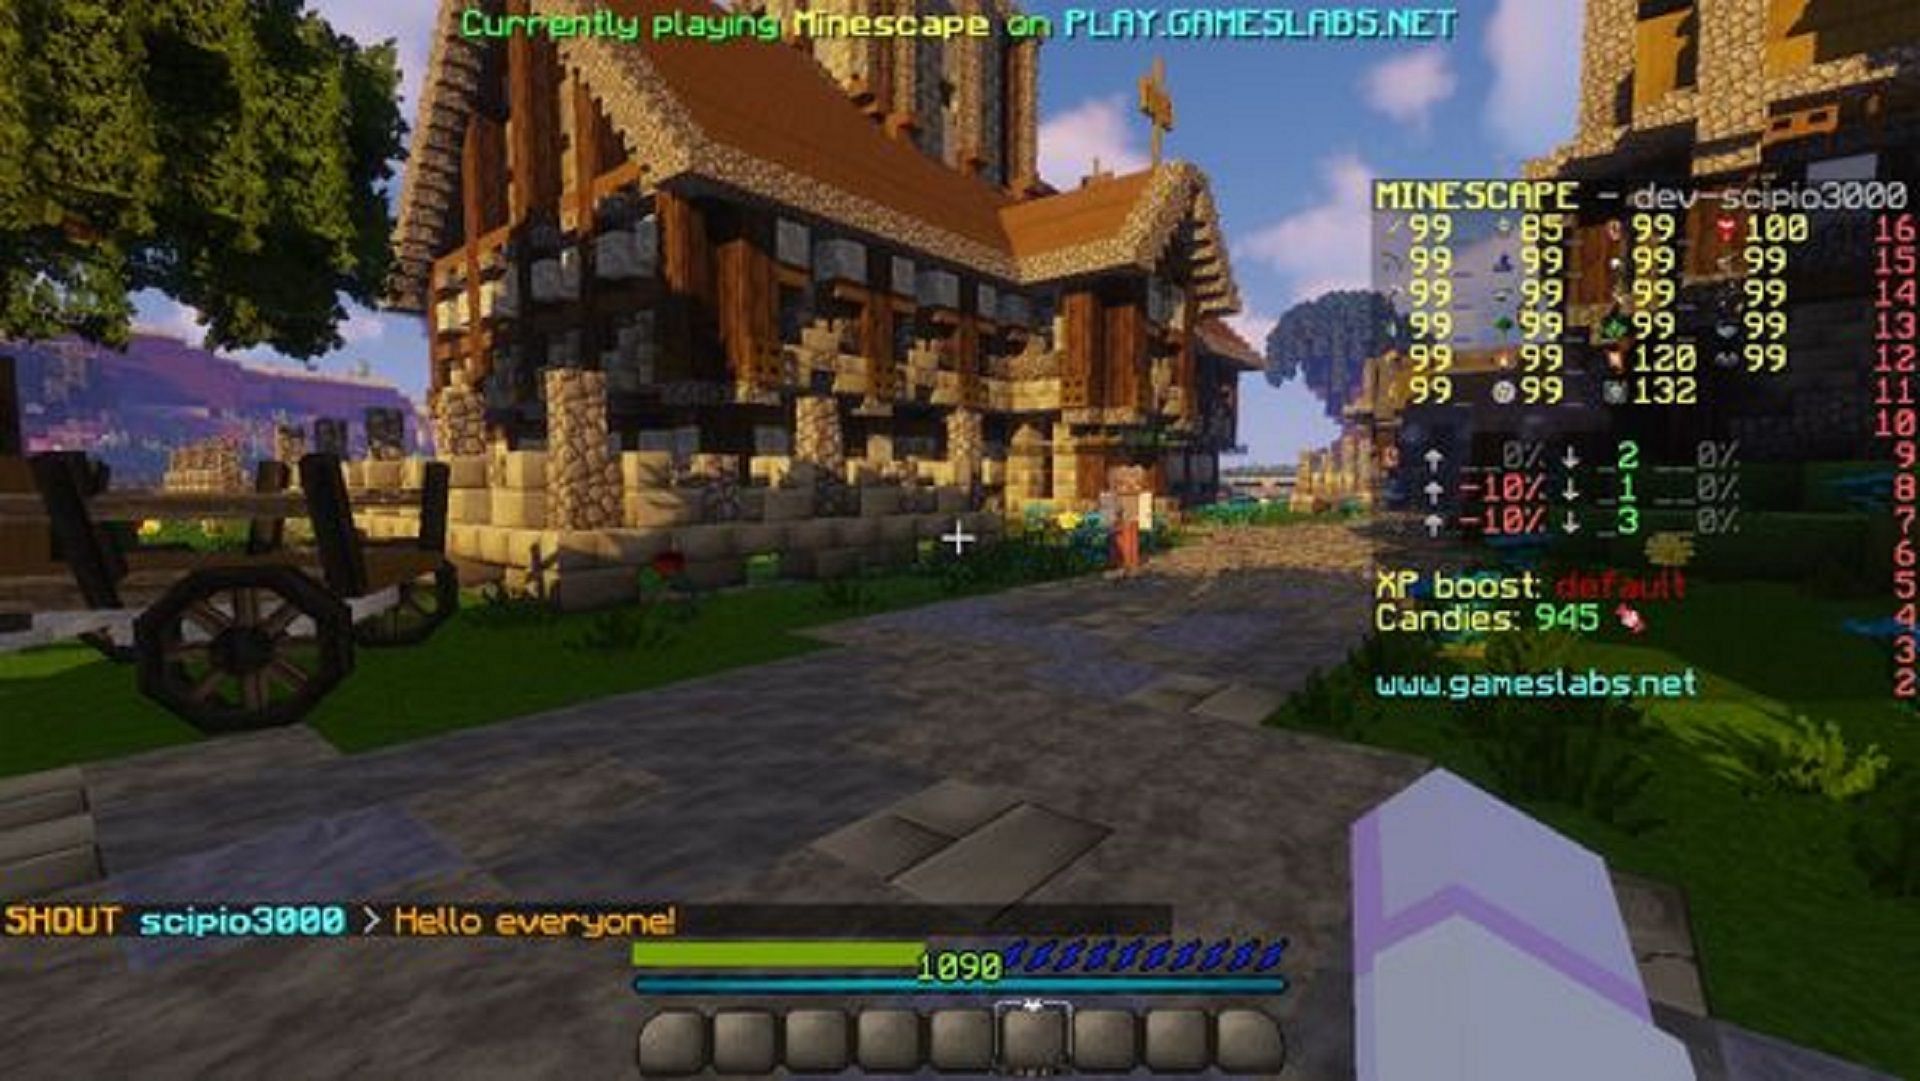 Minescape adds some MMORPG flavor to traditional Minecraft gameplay (Image via Minescape)